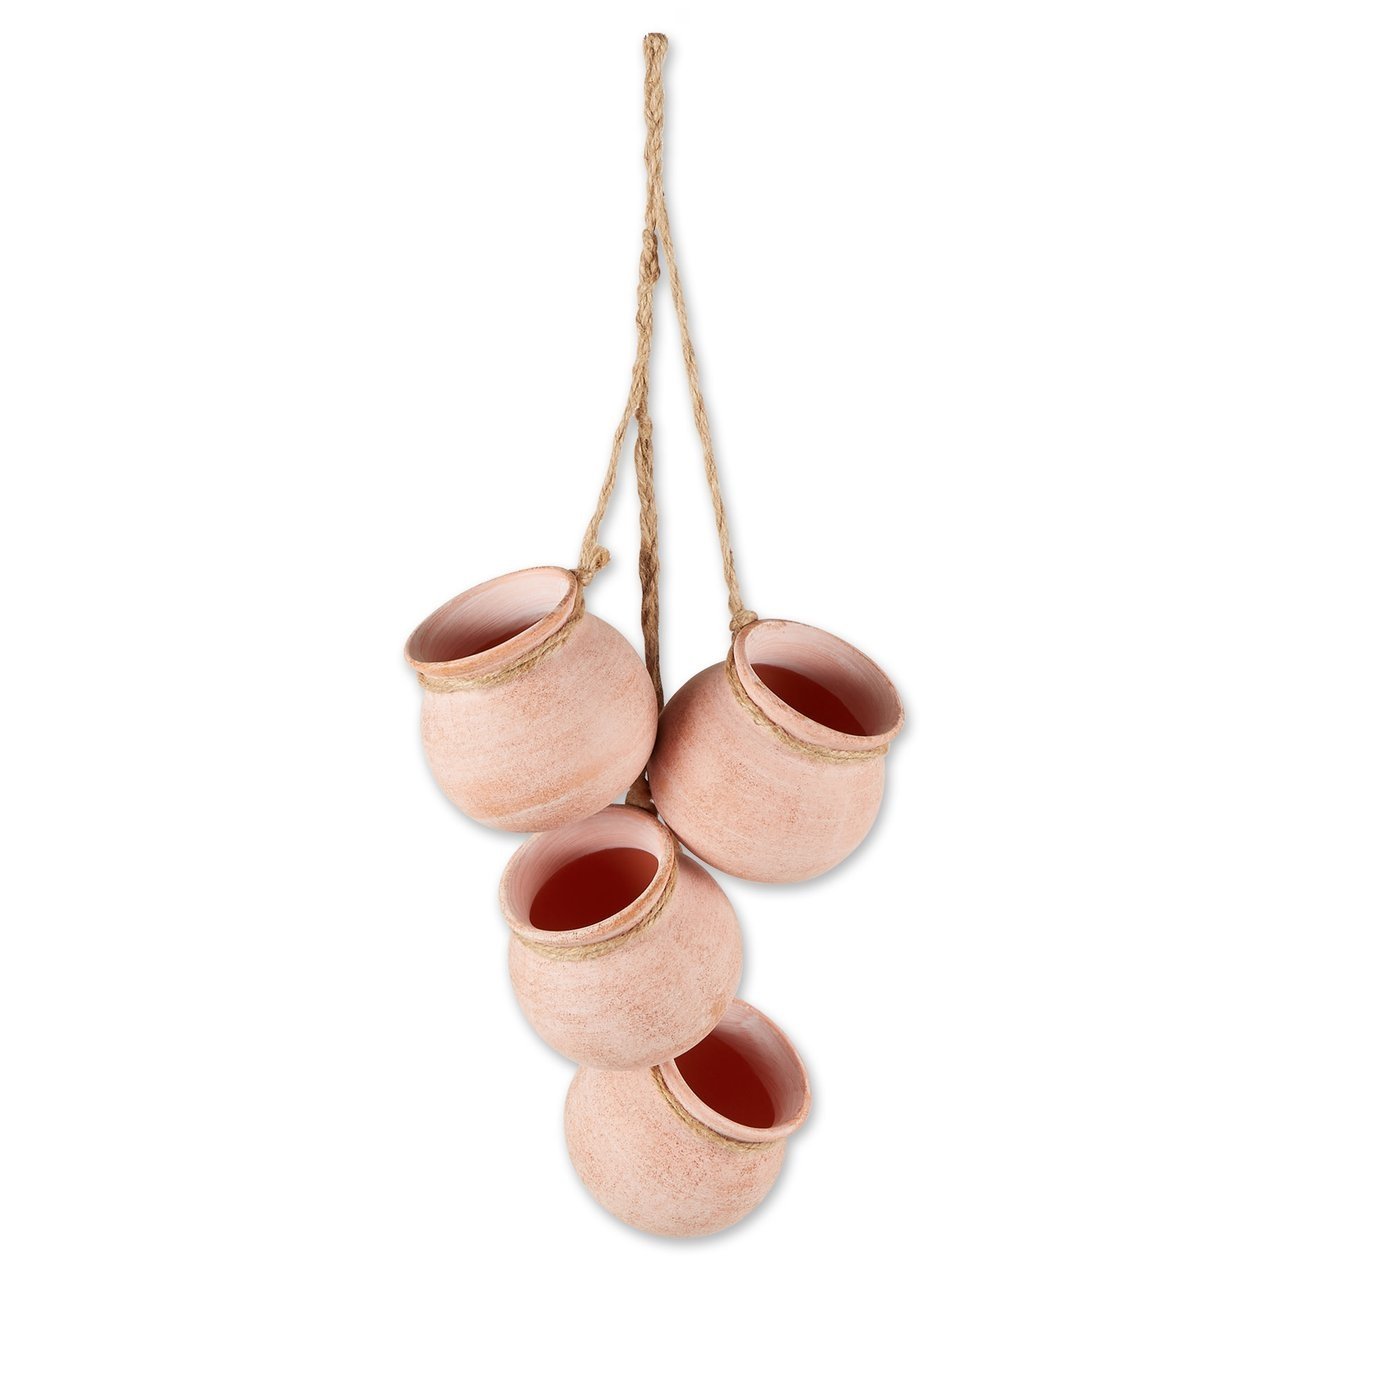 Dangling Pots Decor in Whitewashed Terra Cotta - Ethereal Company